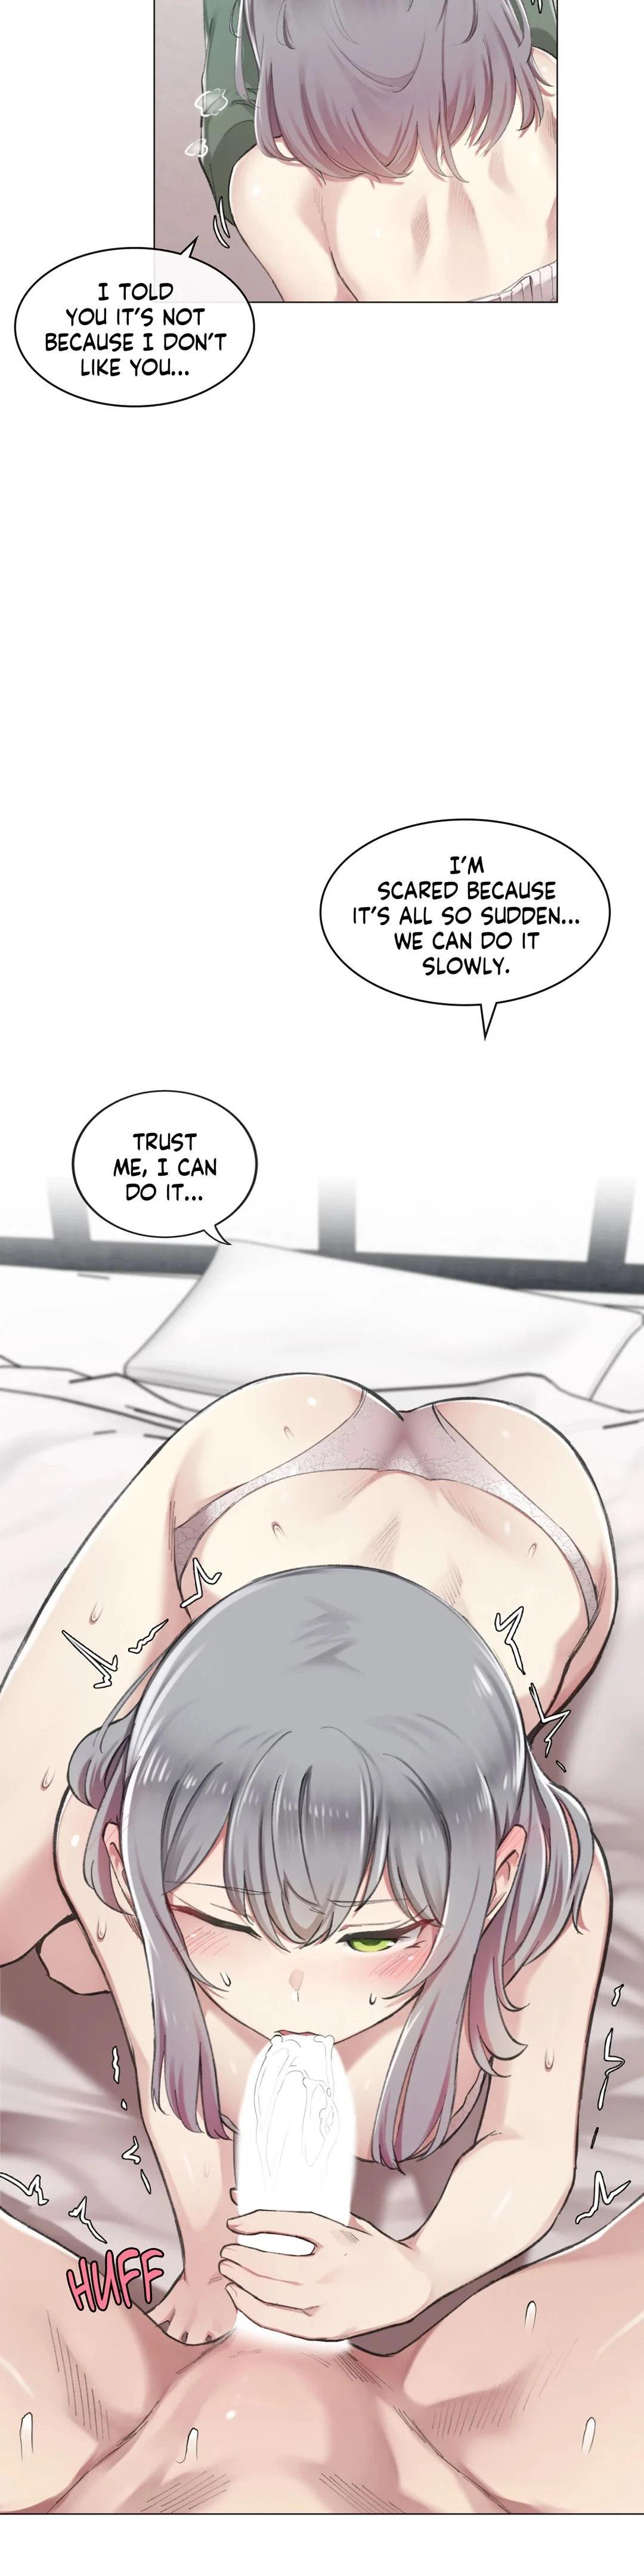 [Dumangoon, KONG_] Sexcape Room: Snap Off Ch.7/7 [English] [Manhwa PDF] Completed 61